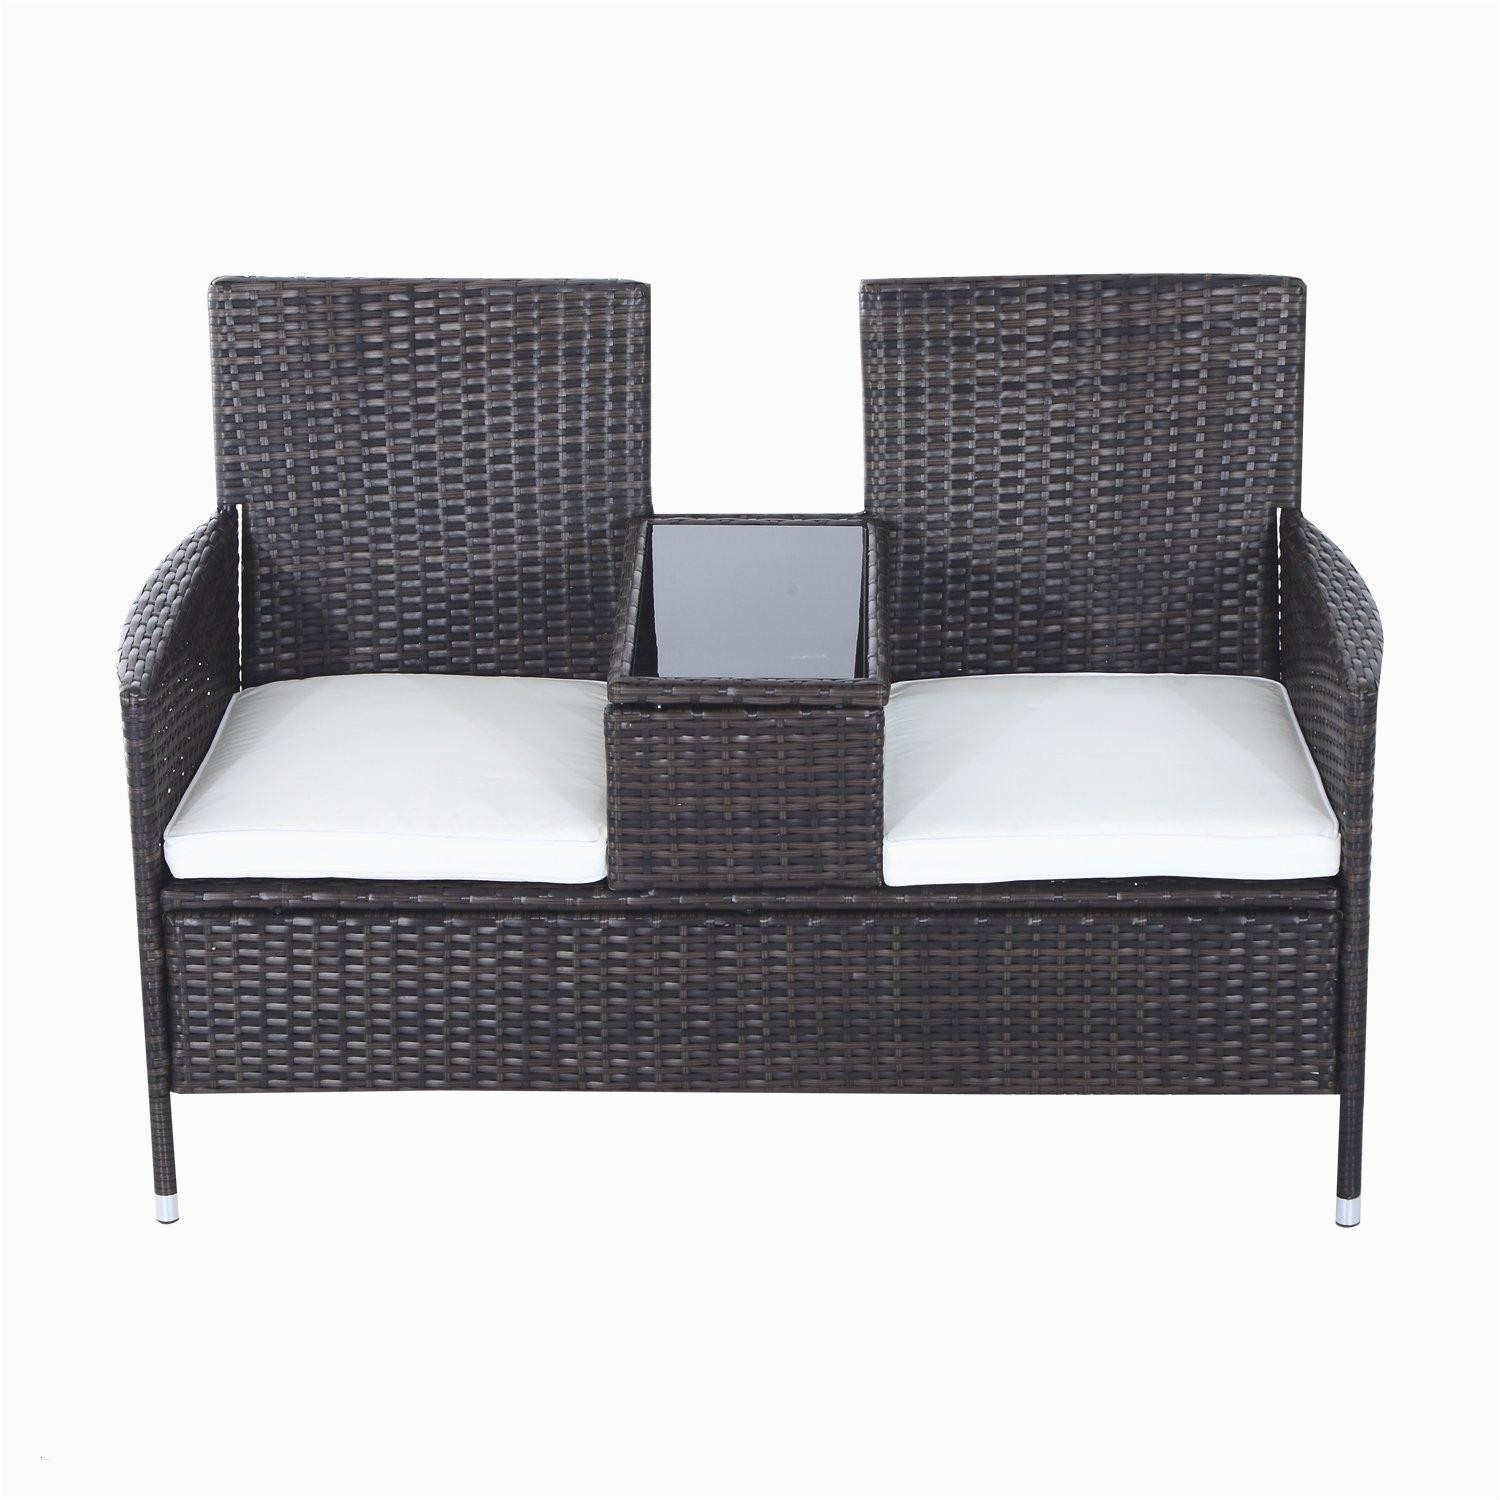 patio furniture feet replacement lovely furniture wicker loveseat unique wicker outdoor sofa 0d patio patio amazing outdoor furniture stores near me